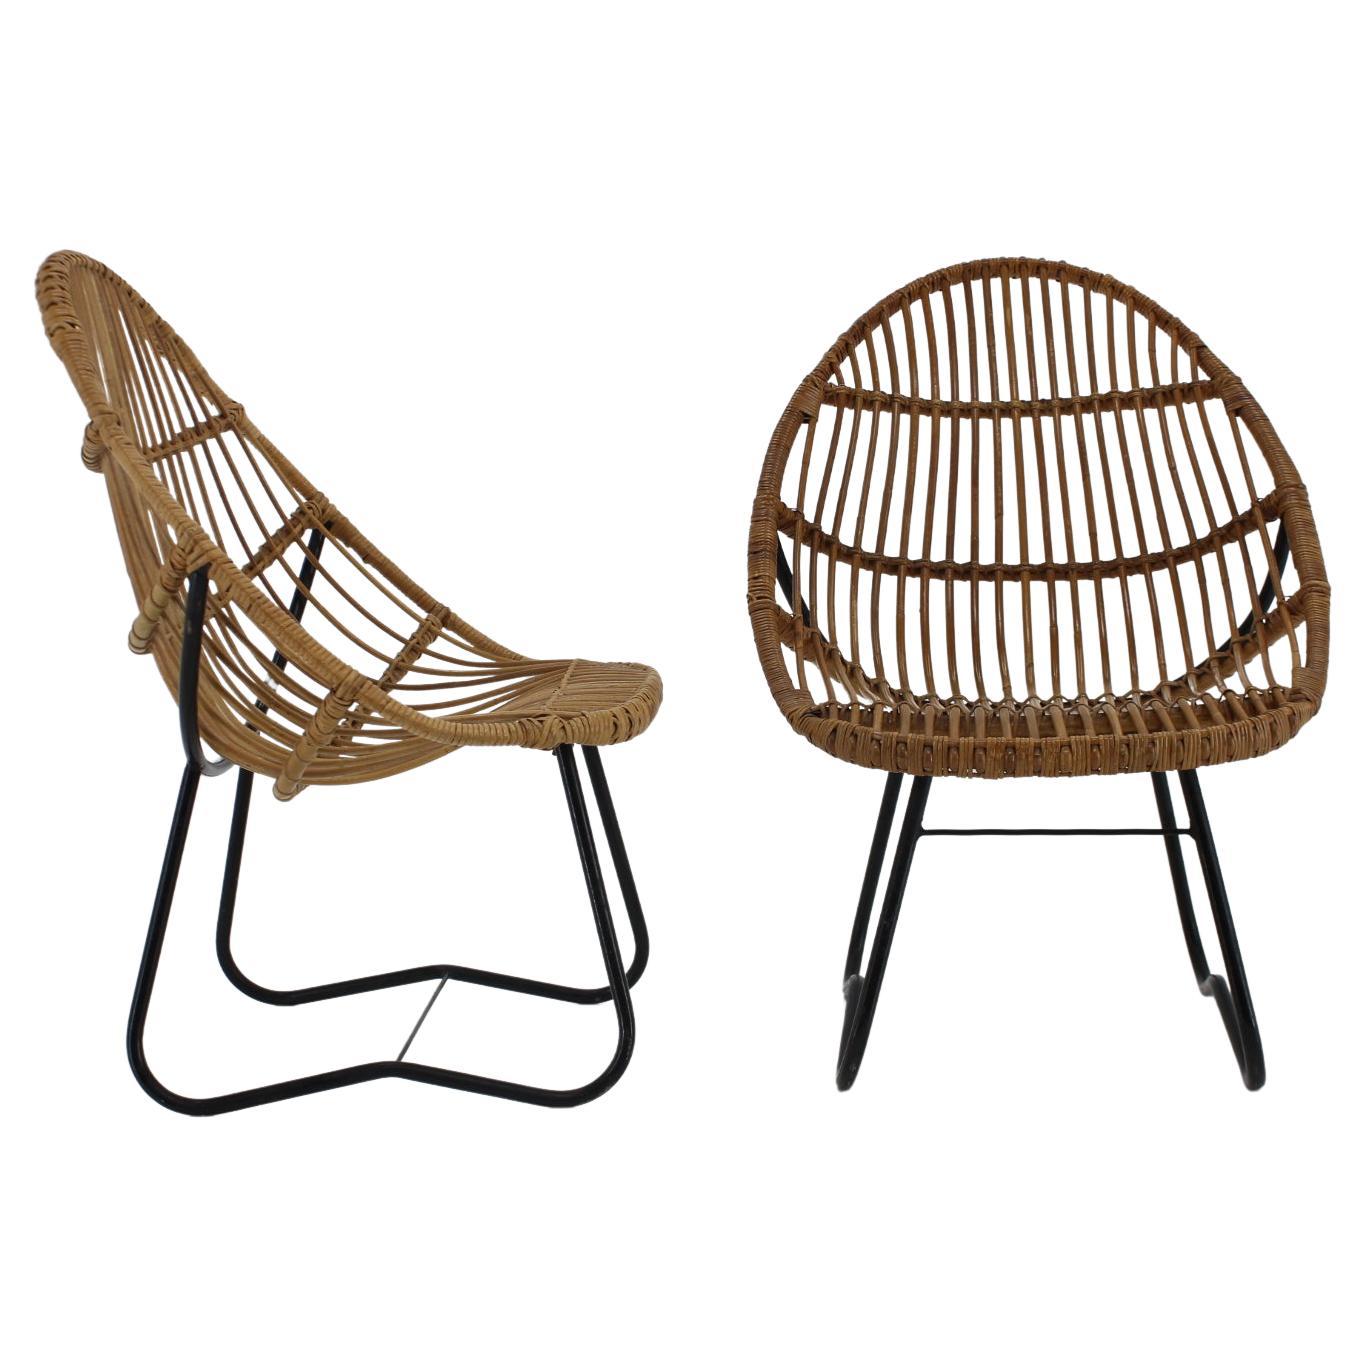 1960s Pair of Alan Fuchs Rattan Lounge Chairs by Uluv, Czechoslovakia For Sale